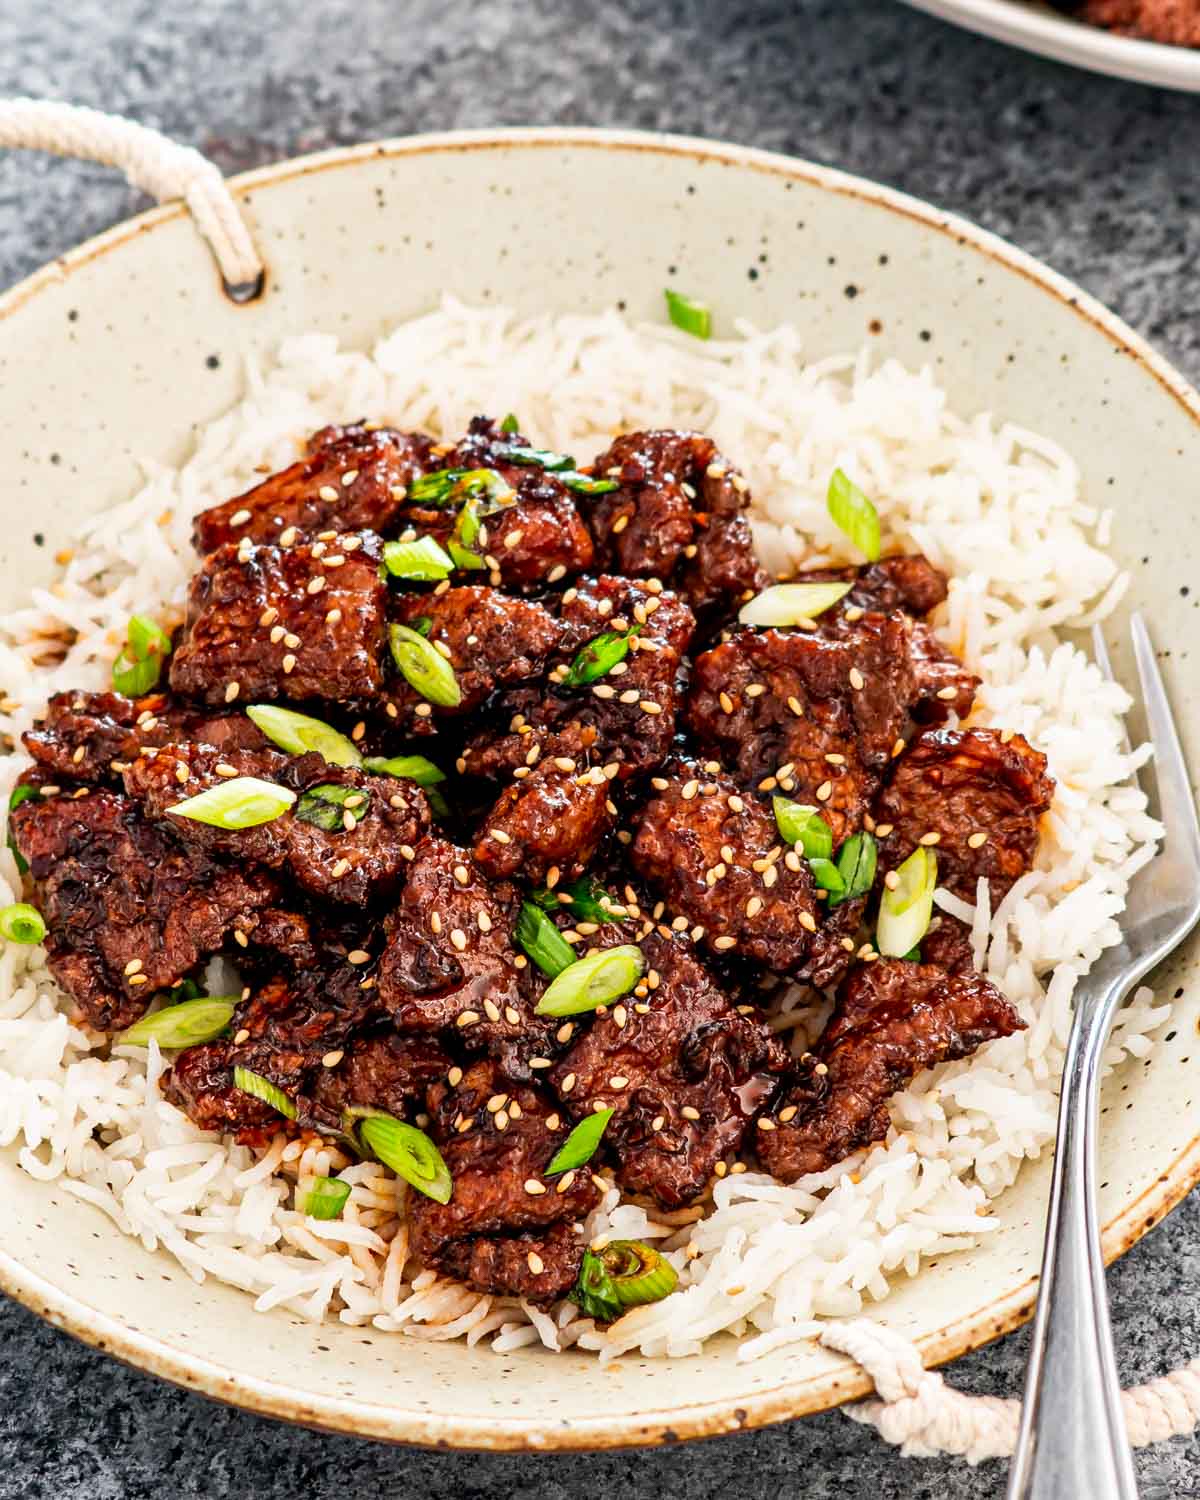 mongolian beef over a bed of rice garnished with green onions and sesame seeds.